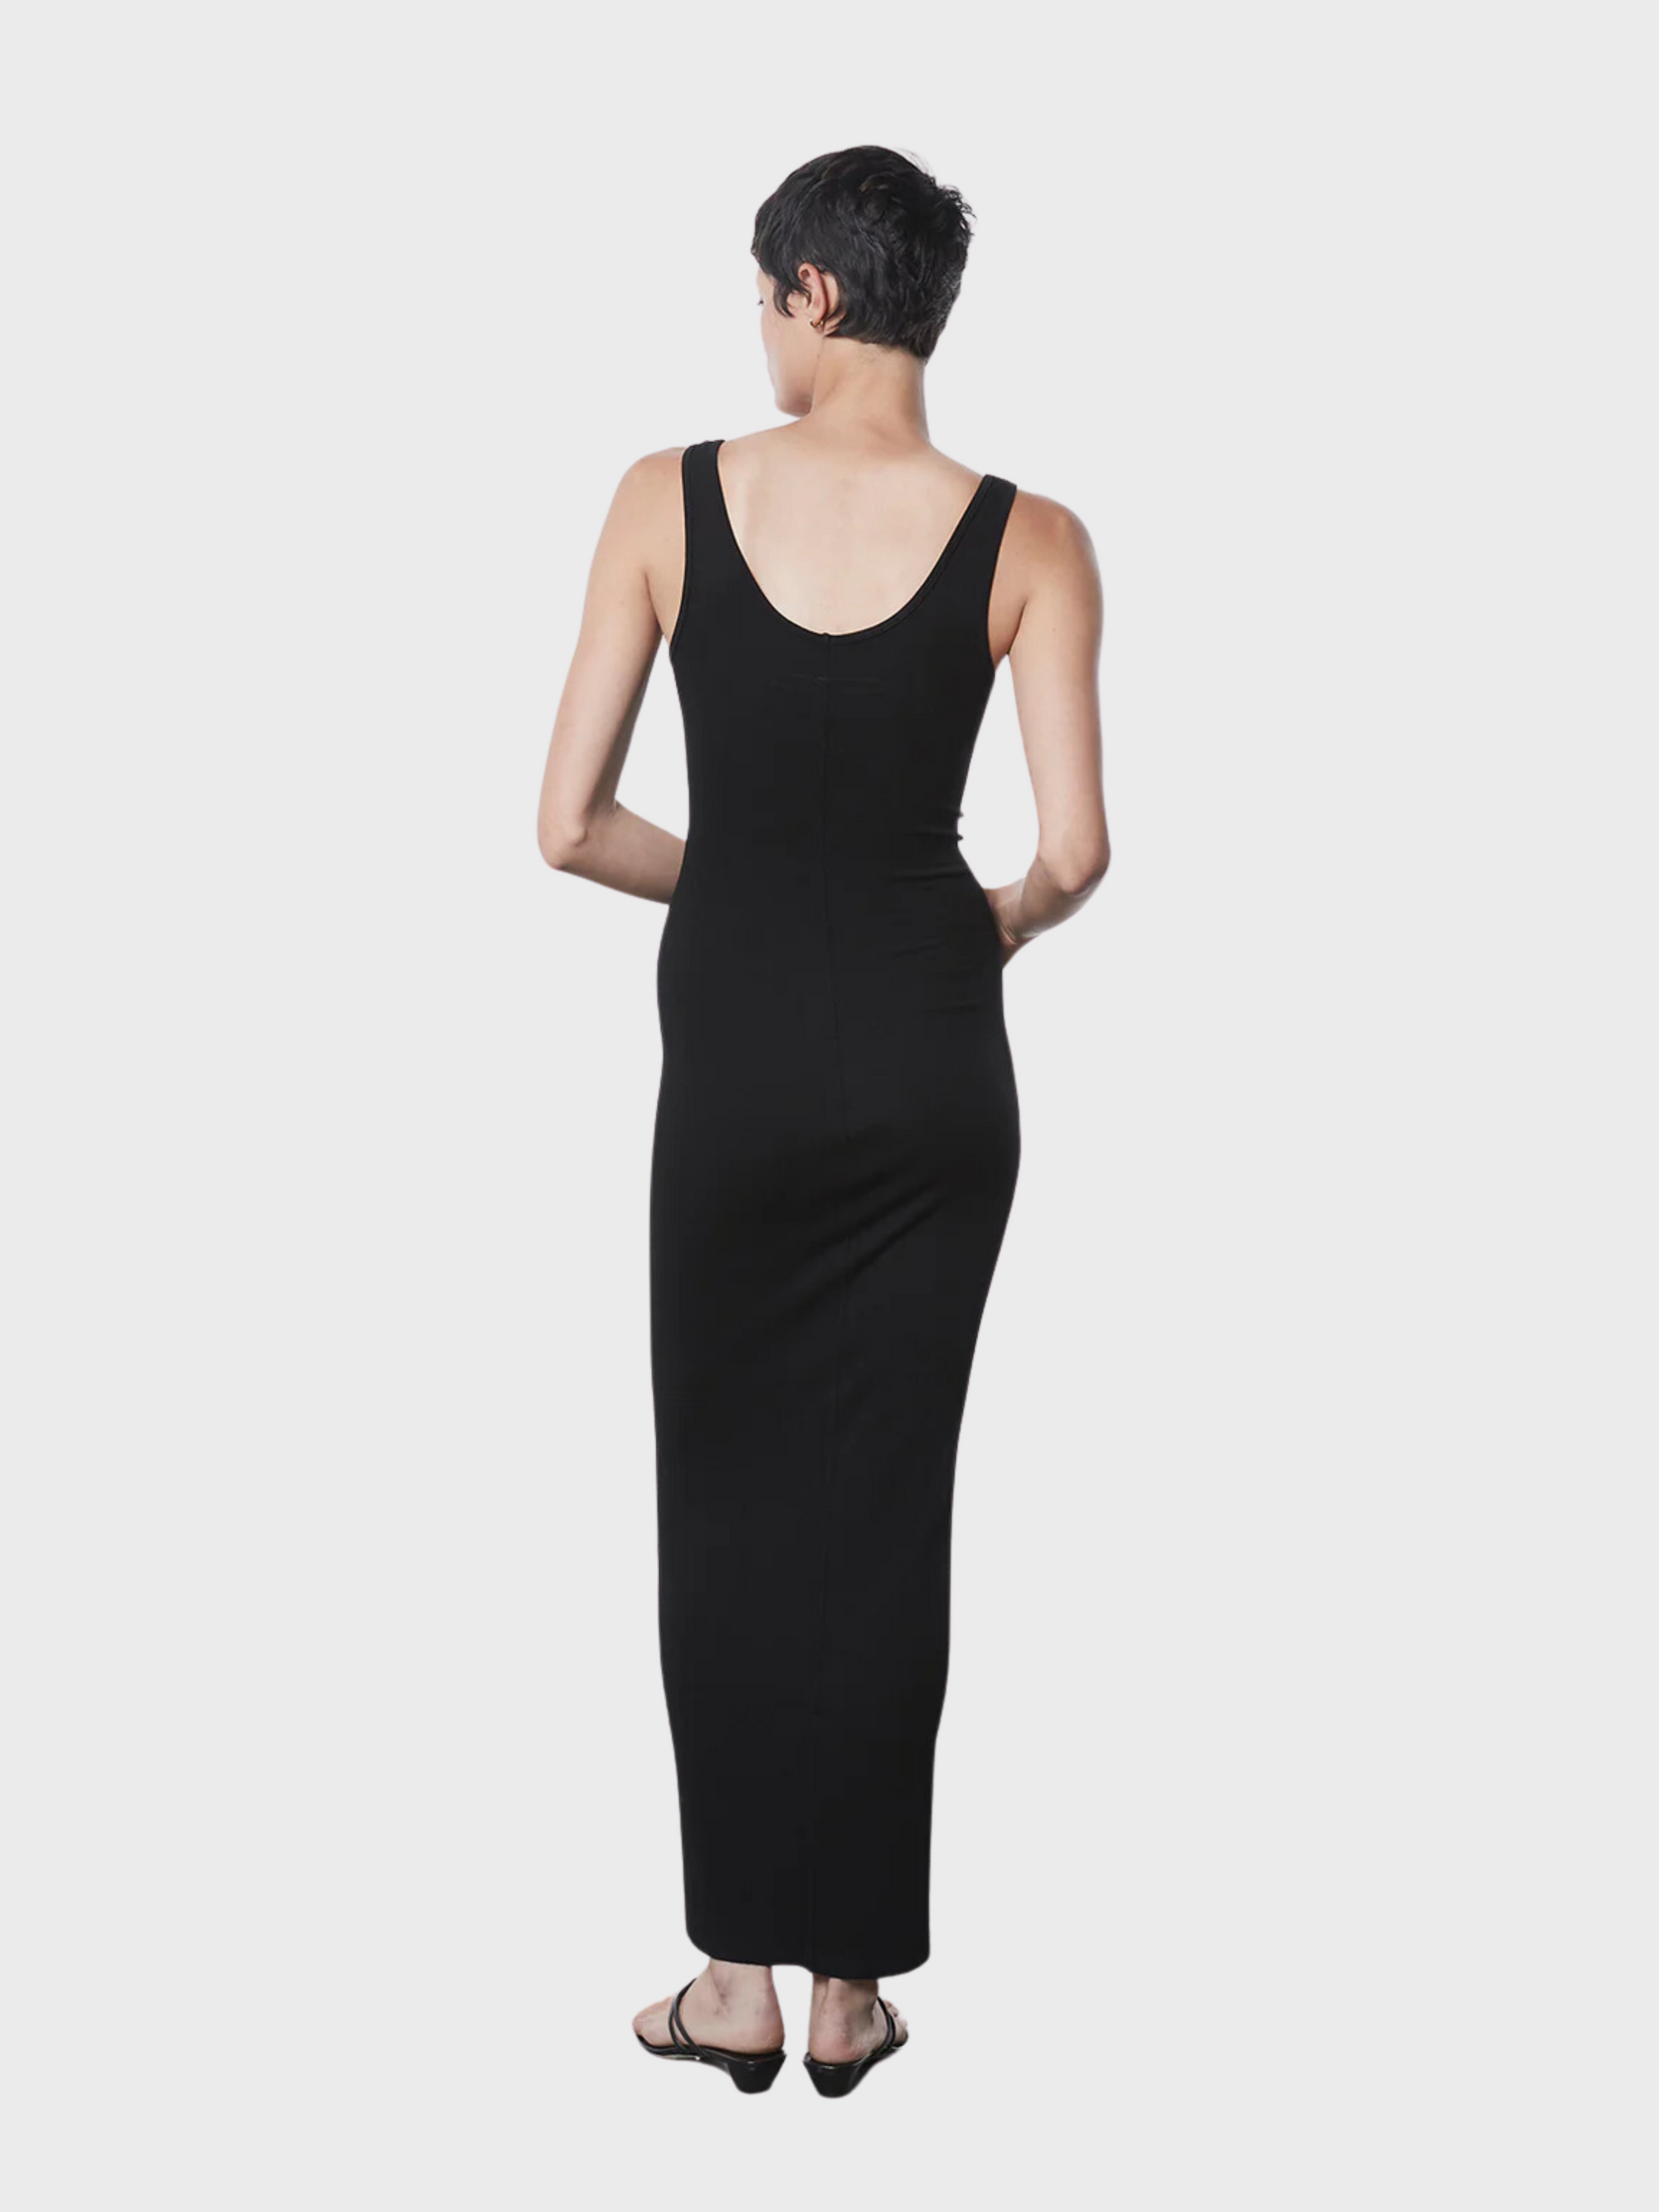 Enza Costa Stretch Silk Knit Maxi Tank Dress Black-Dresses-West of Woodward Boutique-Vancouver-Canada